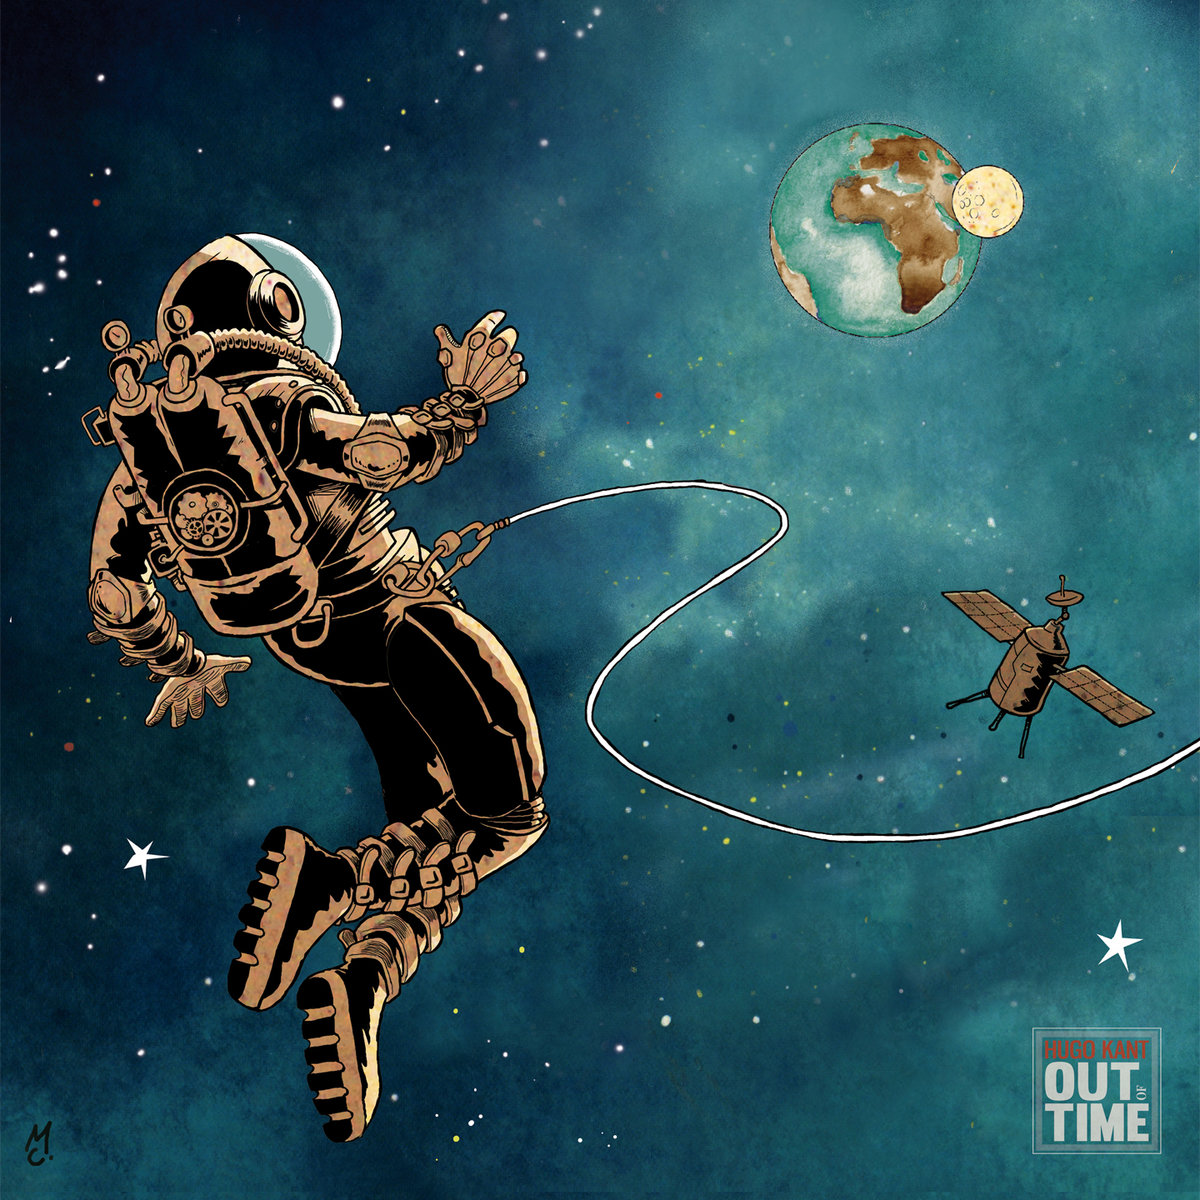 Refined trip hop on “Out Of Time” by Hugo Kant